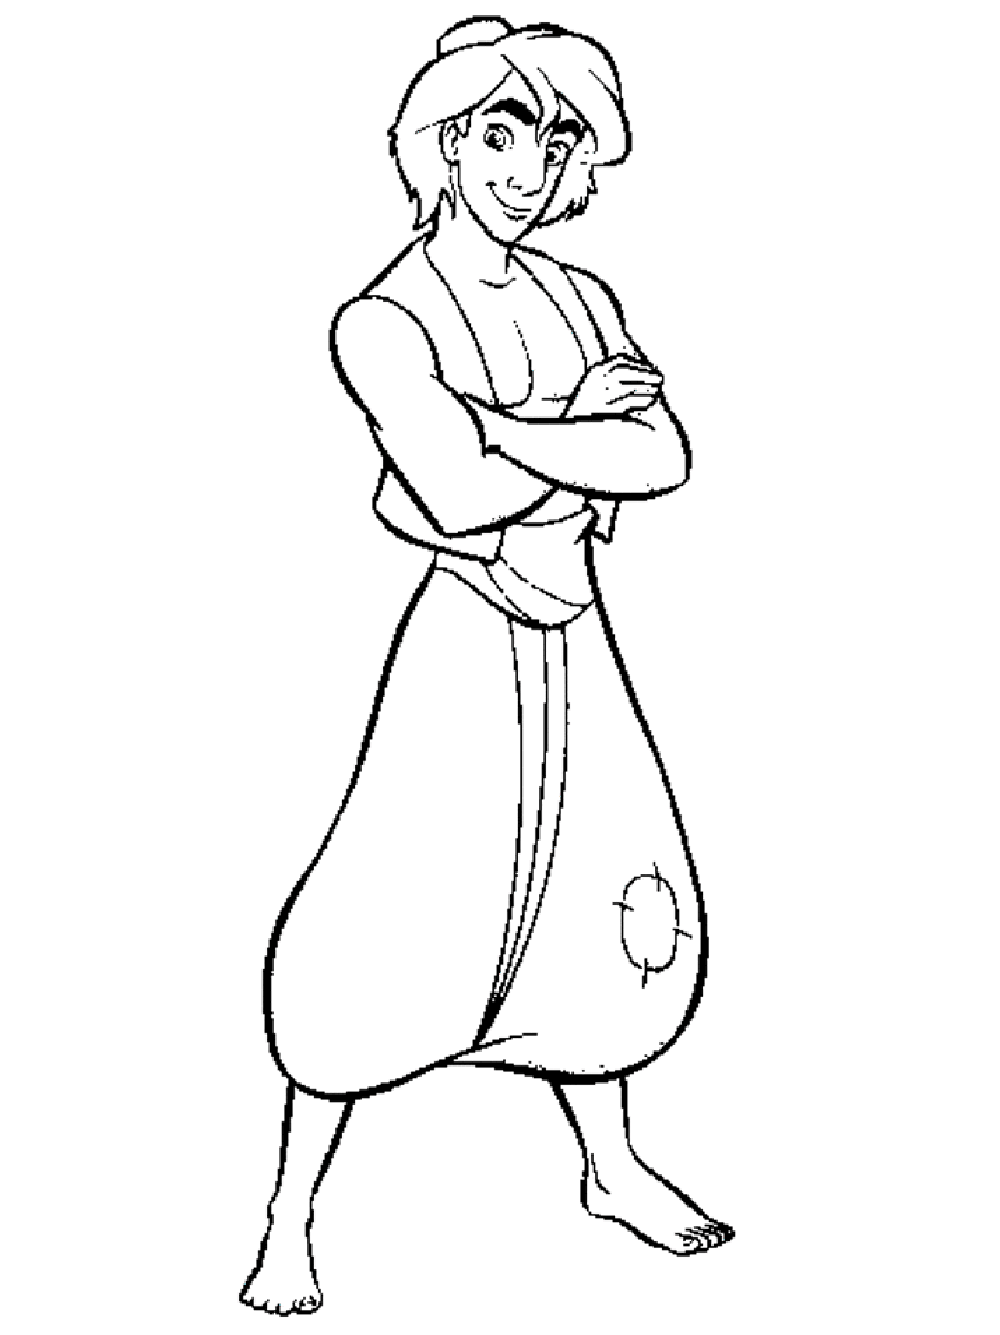 Aladdin Standing Coloring Pages For Kids #b2G : Printable Aladin ...